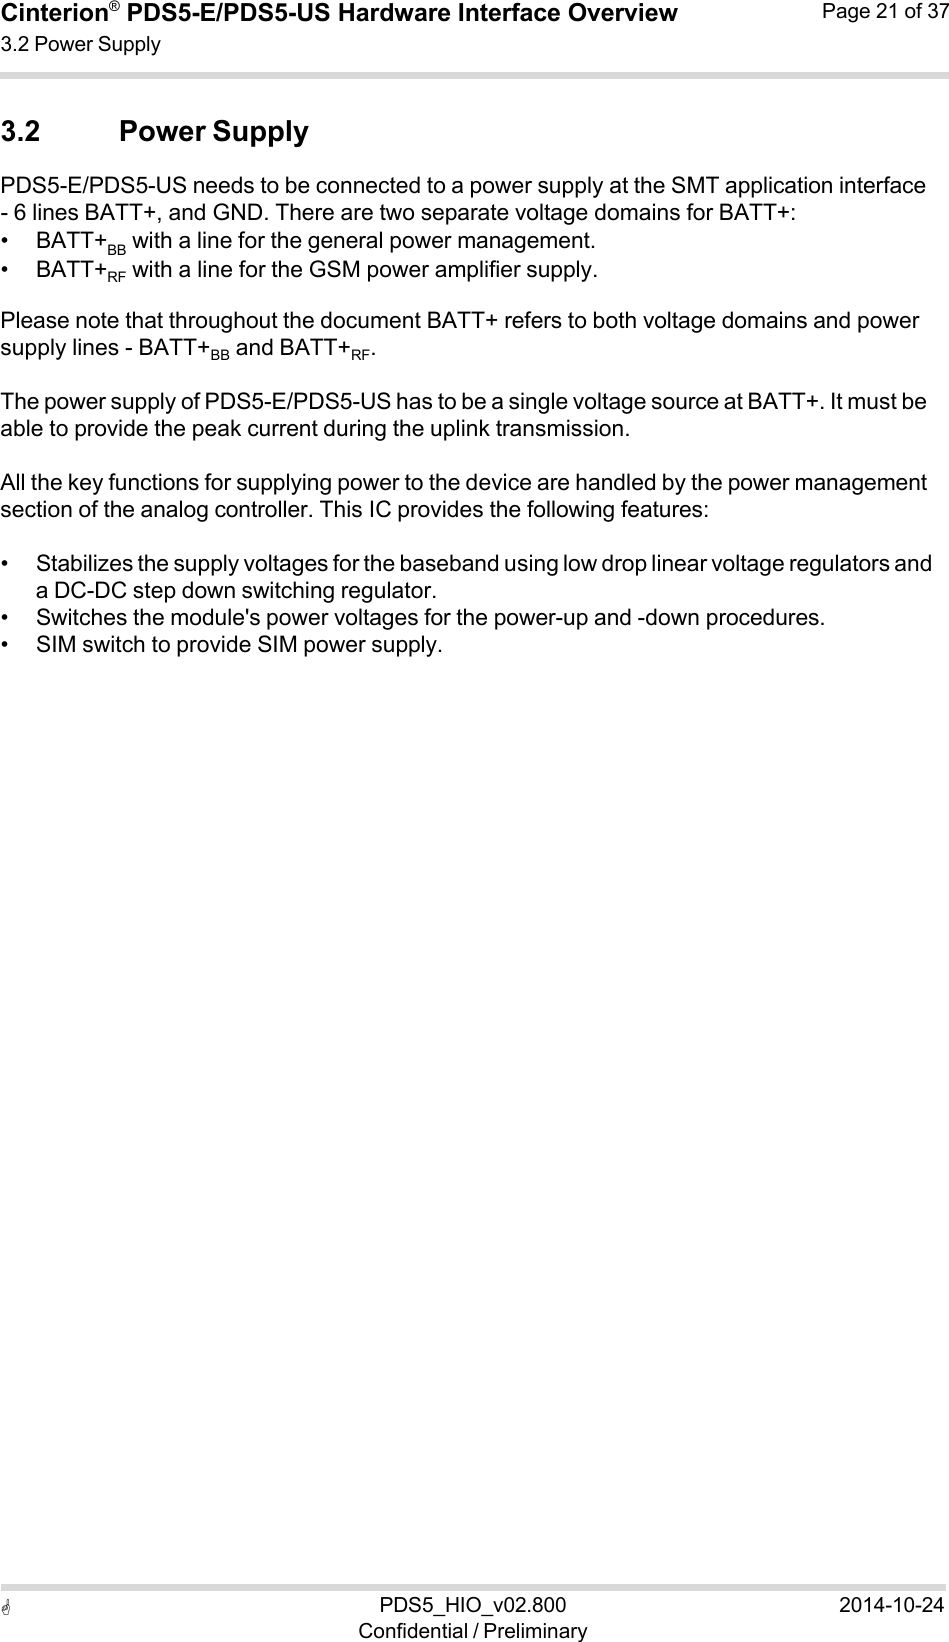  PDS5_HIO_v02.800Confidential / Preliminary2014-10-24Cinterion®  PDS5-E/PDS5-US Hardware Interface Overview3.2 Power Supply Page 21 of 37   3.2 Power Supply PDS5-E/PDS5-US needs to be connected to a power supply at the SMT application interface - 6 lines BATT+, and GND. There are two separate voltage domains for BATT+: • BATT+BB  with a line for the general power management. • BATT+RF  with a line for the GSM power amplifier supply. Please note that throughout the document BATT+ refers to both voltage domains and power supply lines - BATT+BB  and BATT+RF. The power supply of PDS5-E/PDS5-US has to be a single voltage source at BATT+. It must be able to provide the peak current during the uplink transmission.  All the key functions for supplying power to the device are handled by the power management section of the analog controller. This IC provides the following features:  • Stabilizes the supply voltages for the baseband using low drop linear voltage regulators and a DC-DC step down switching regulator. • Switches the module&apos;s power voltages for the power-up and -down procedures. • SIM switch to provide SIM power supply. 